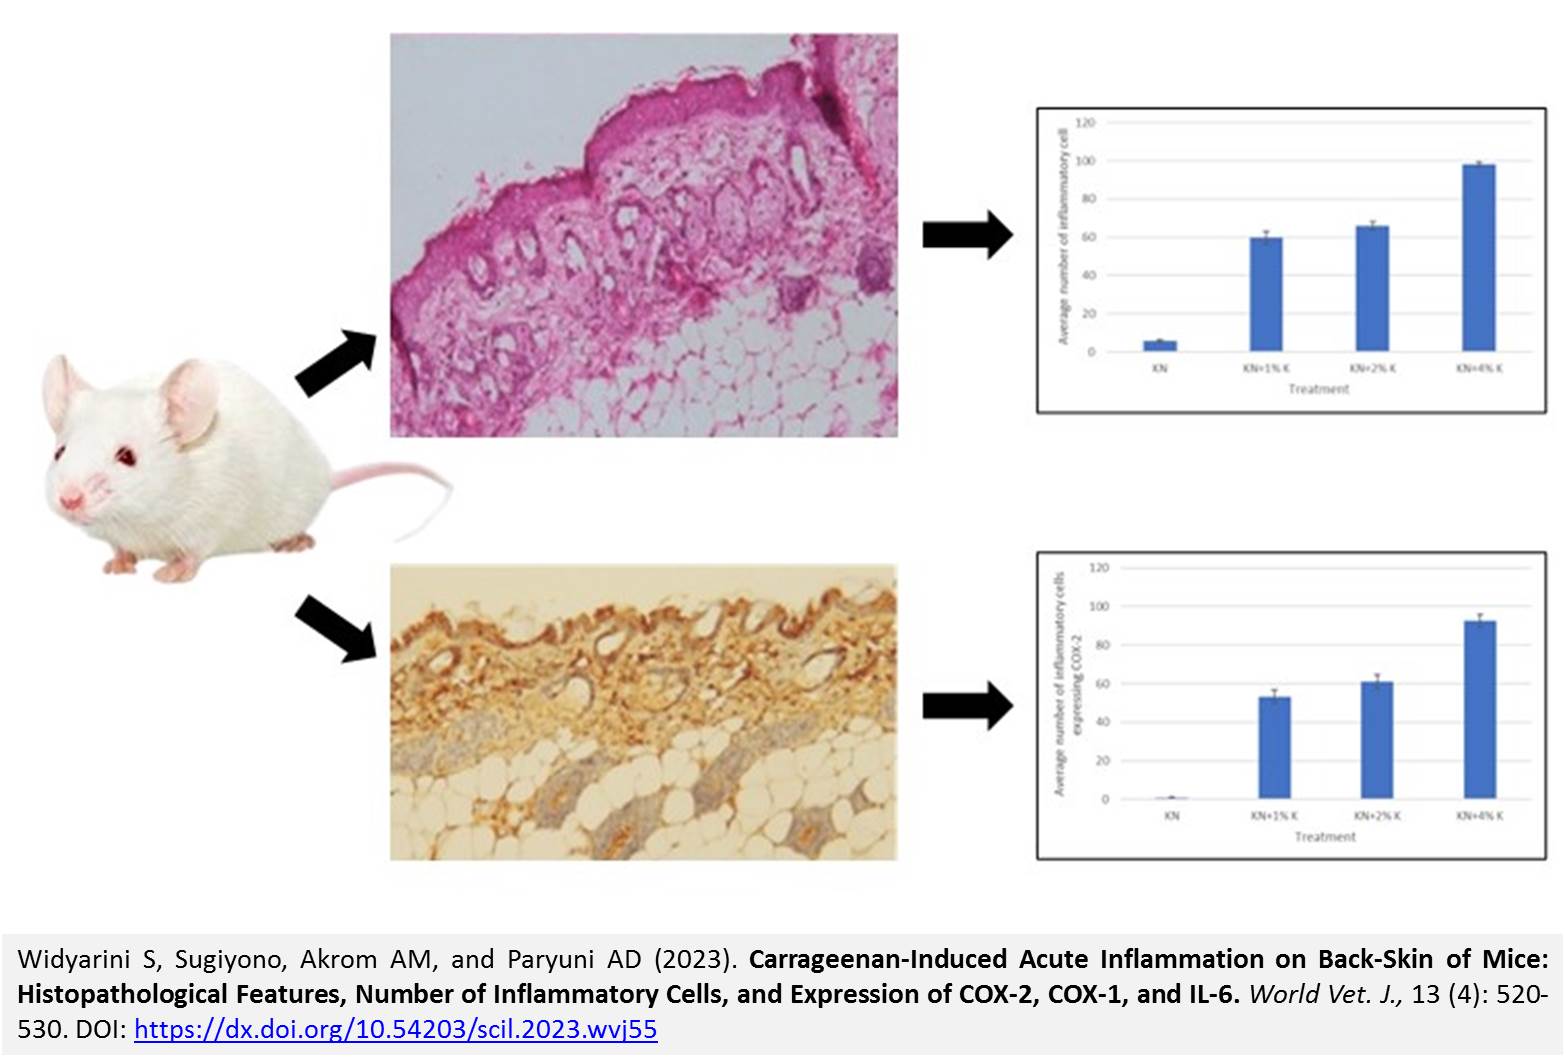 268-Carrageenan-Induced_Acute_Inflammation_on_Back-Skin_of_Mice